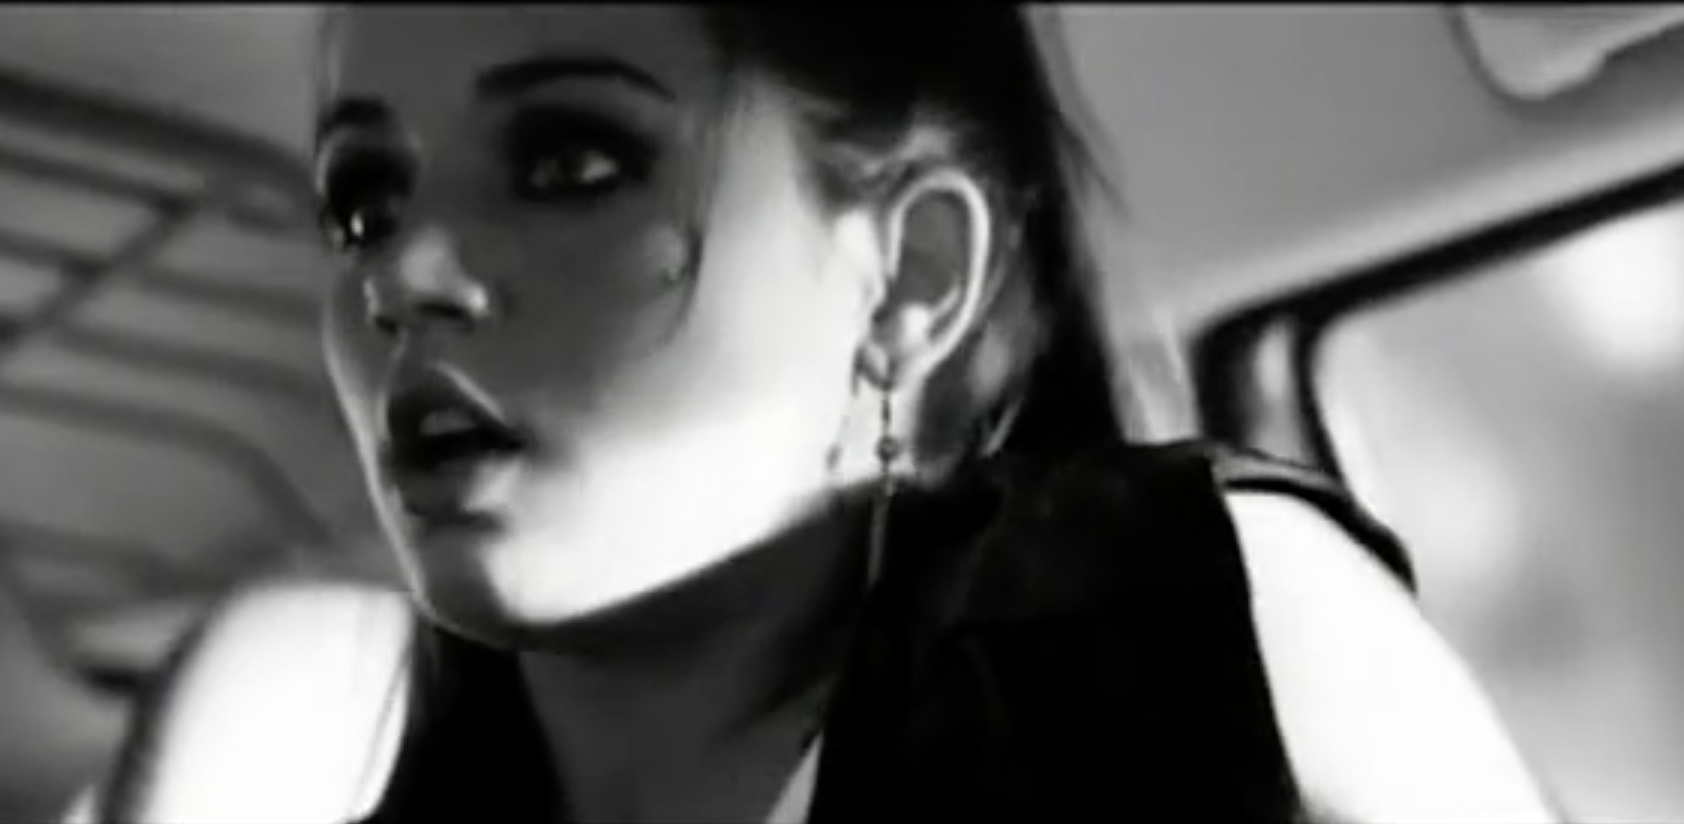 Ana in the music video